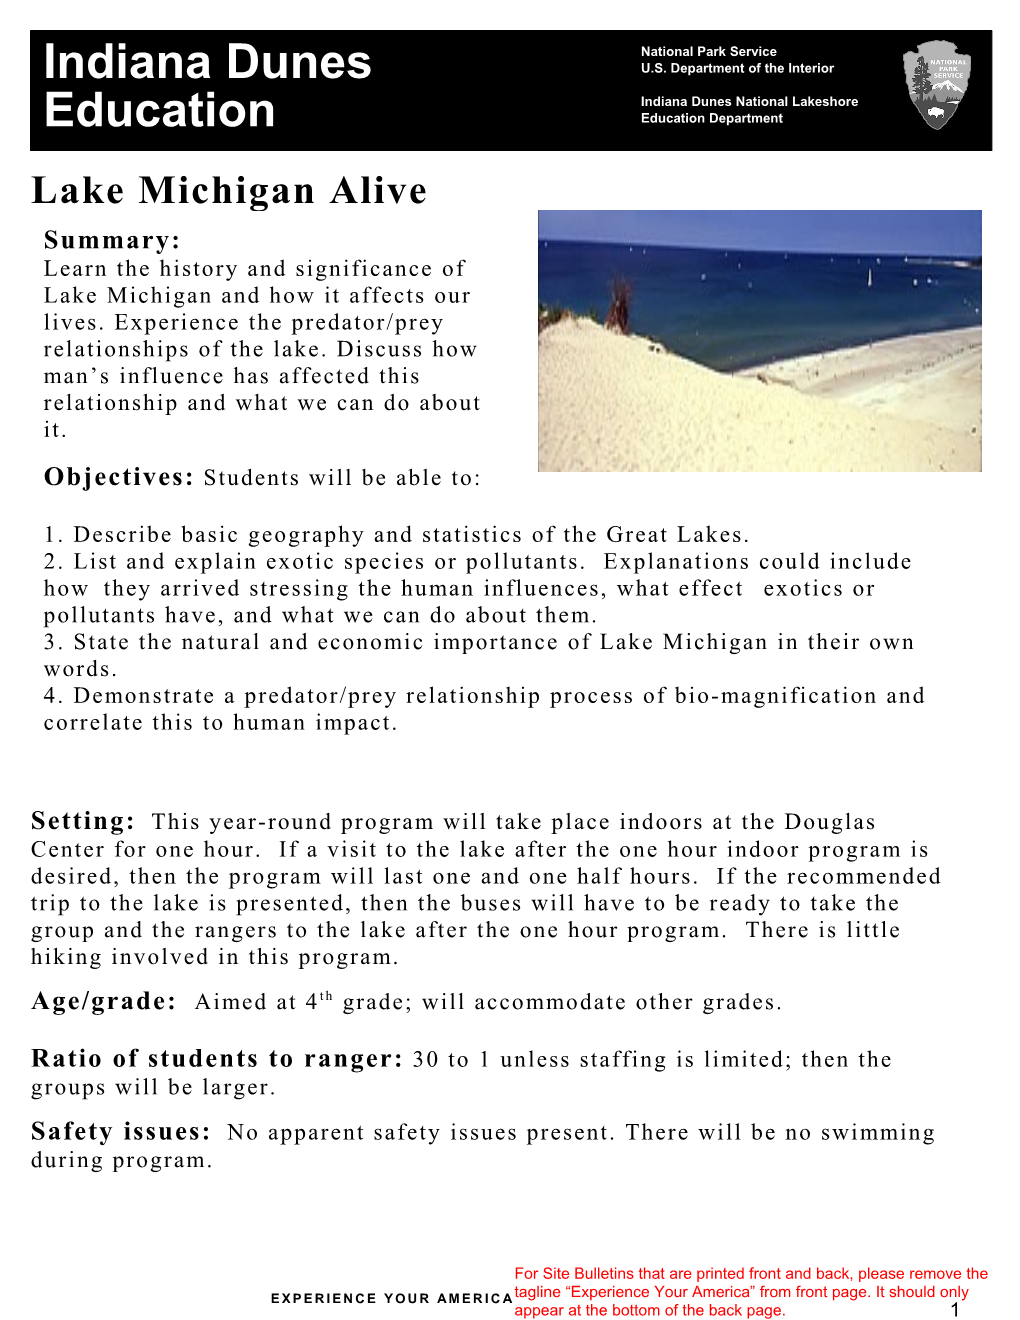 Lake Michigan Is Why We Re Here!